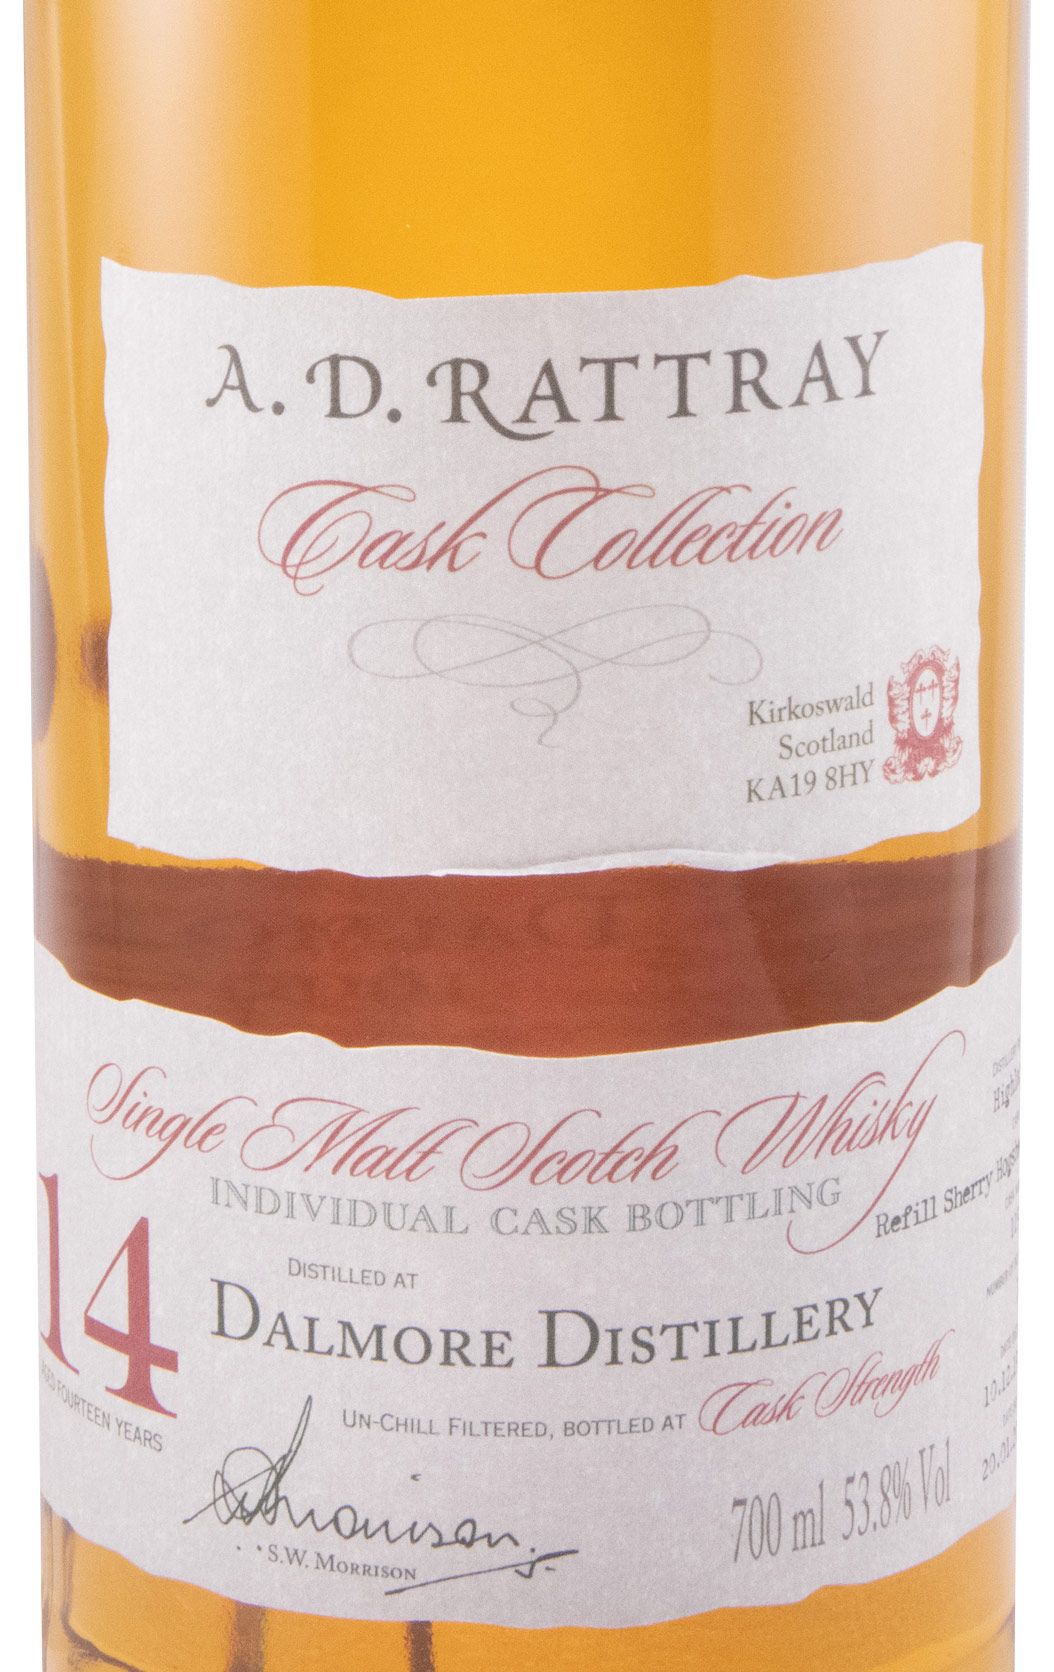 A.D. Rattray Cask Collection Dalmore years